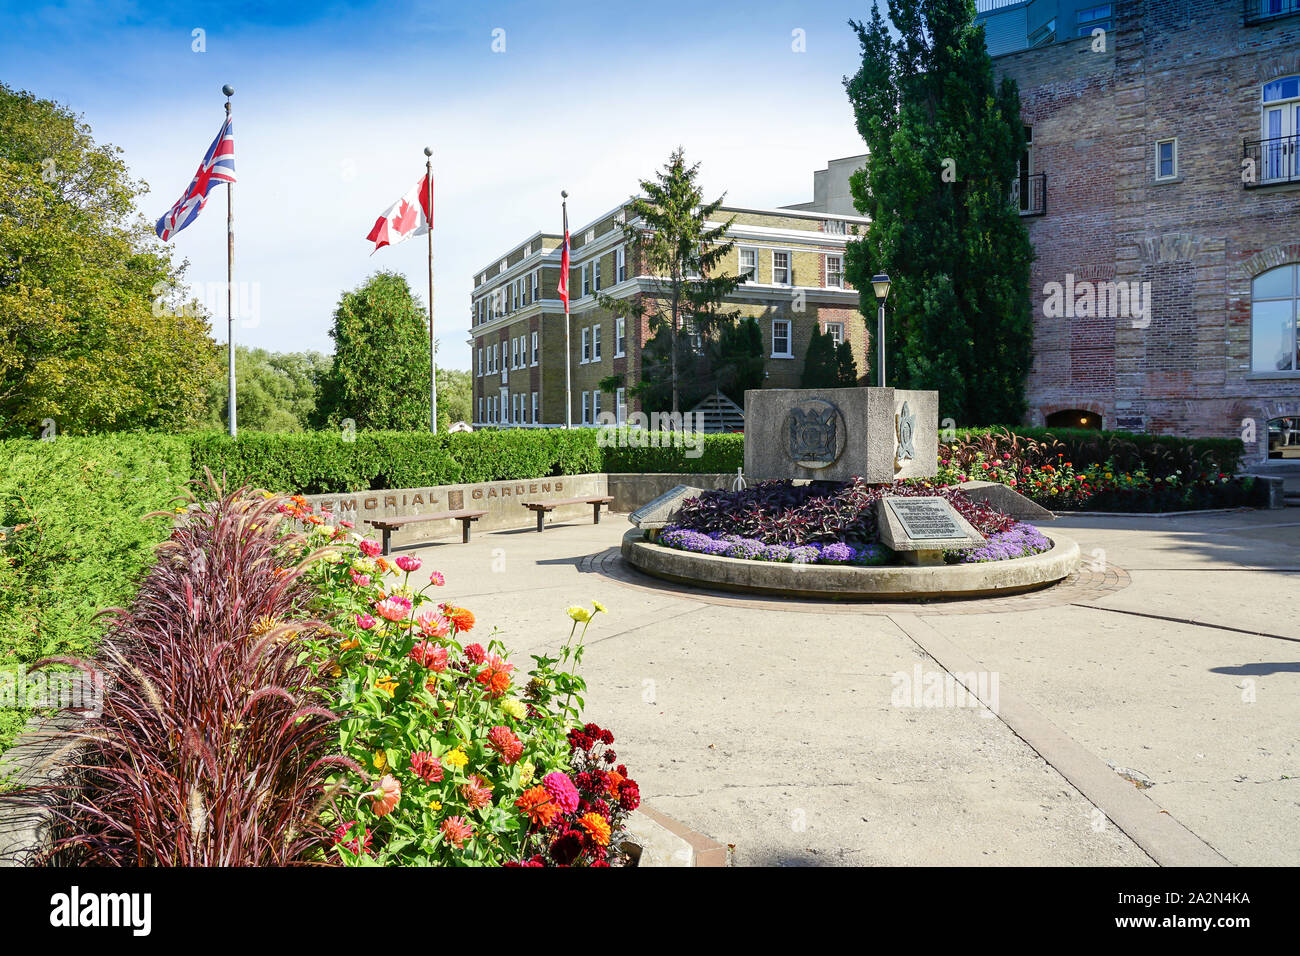 Landmarks and street view and monuments in Stratford, Ontario, Canada, Stock Photo